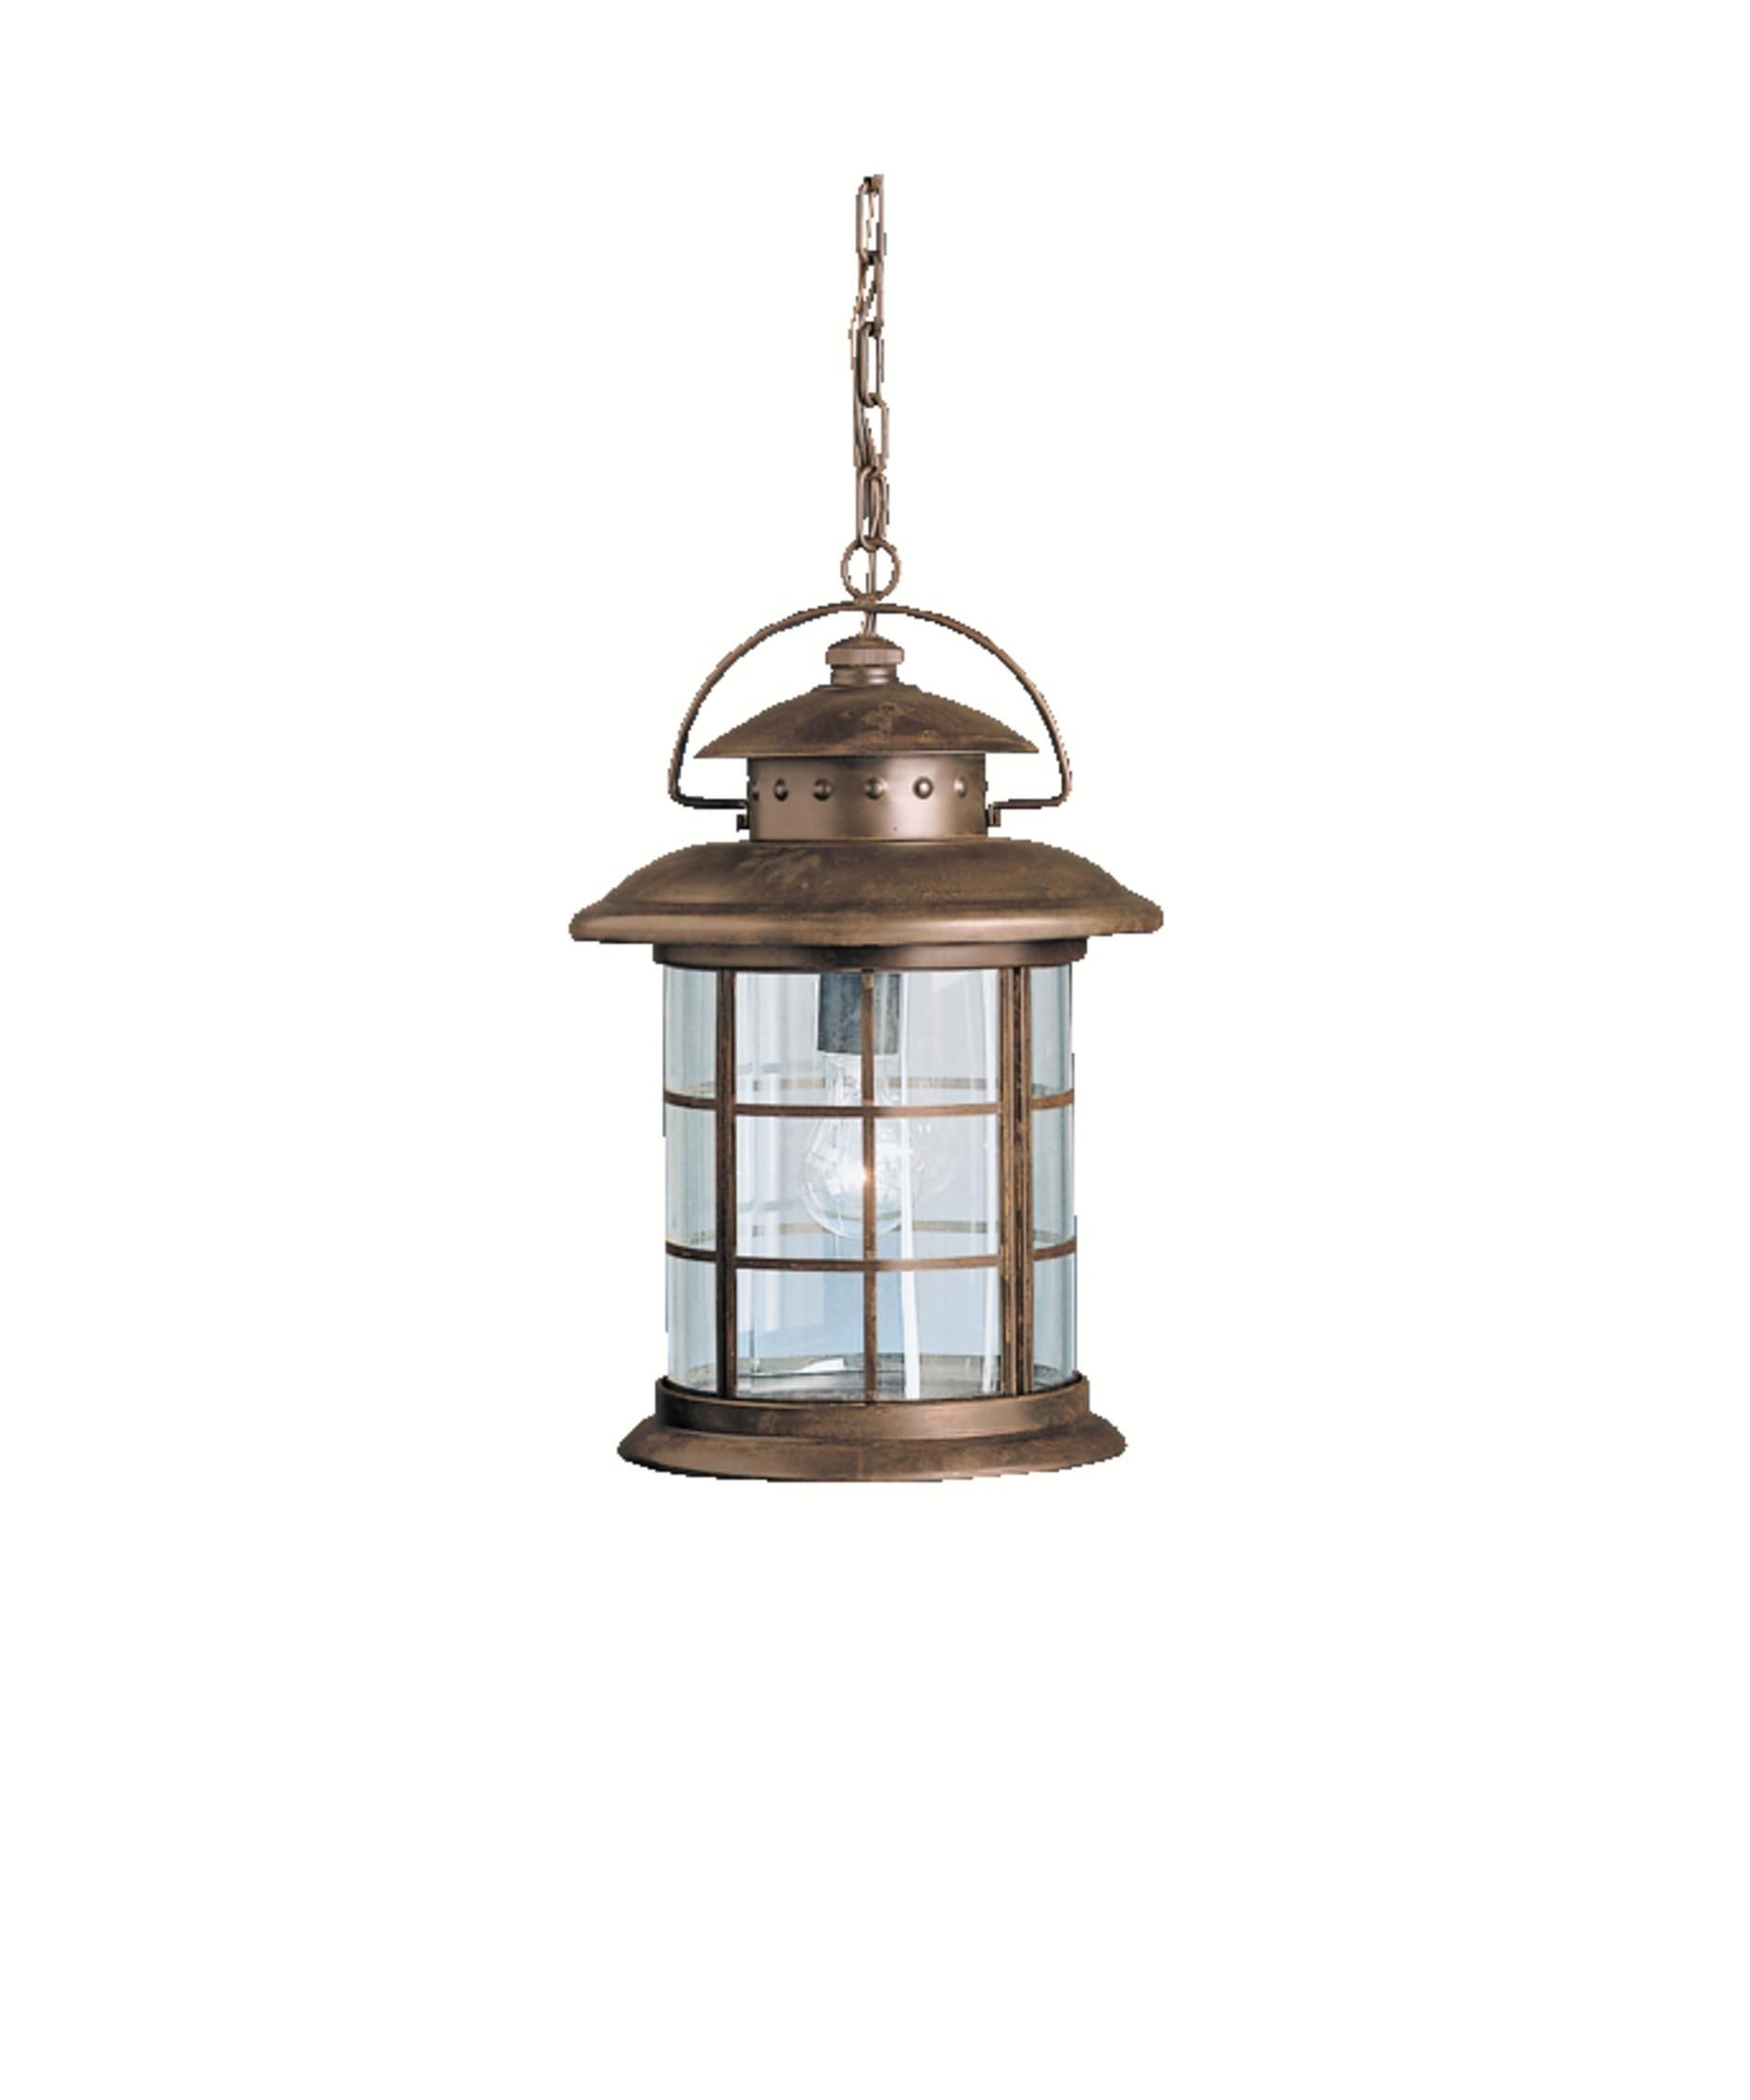 Kichler 9870 Rustic 11 Inch Wide 1 Light Outdoor Hanging Lantern With Rustic Outdoor Ceiling Lights (View 13 of 15)